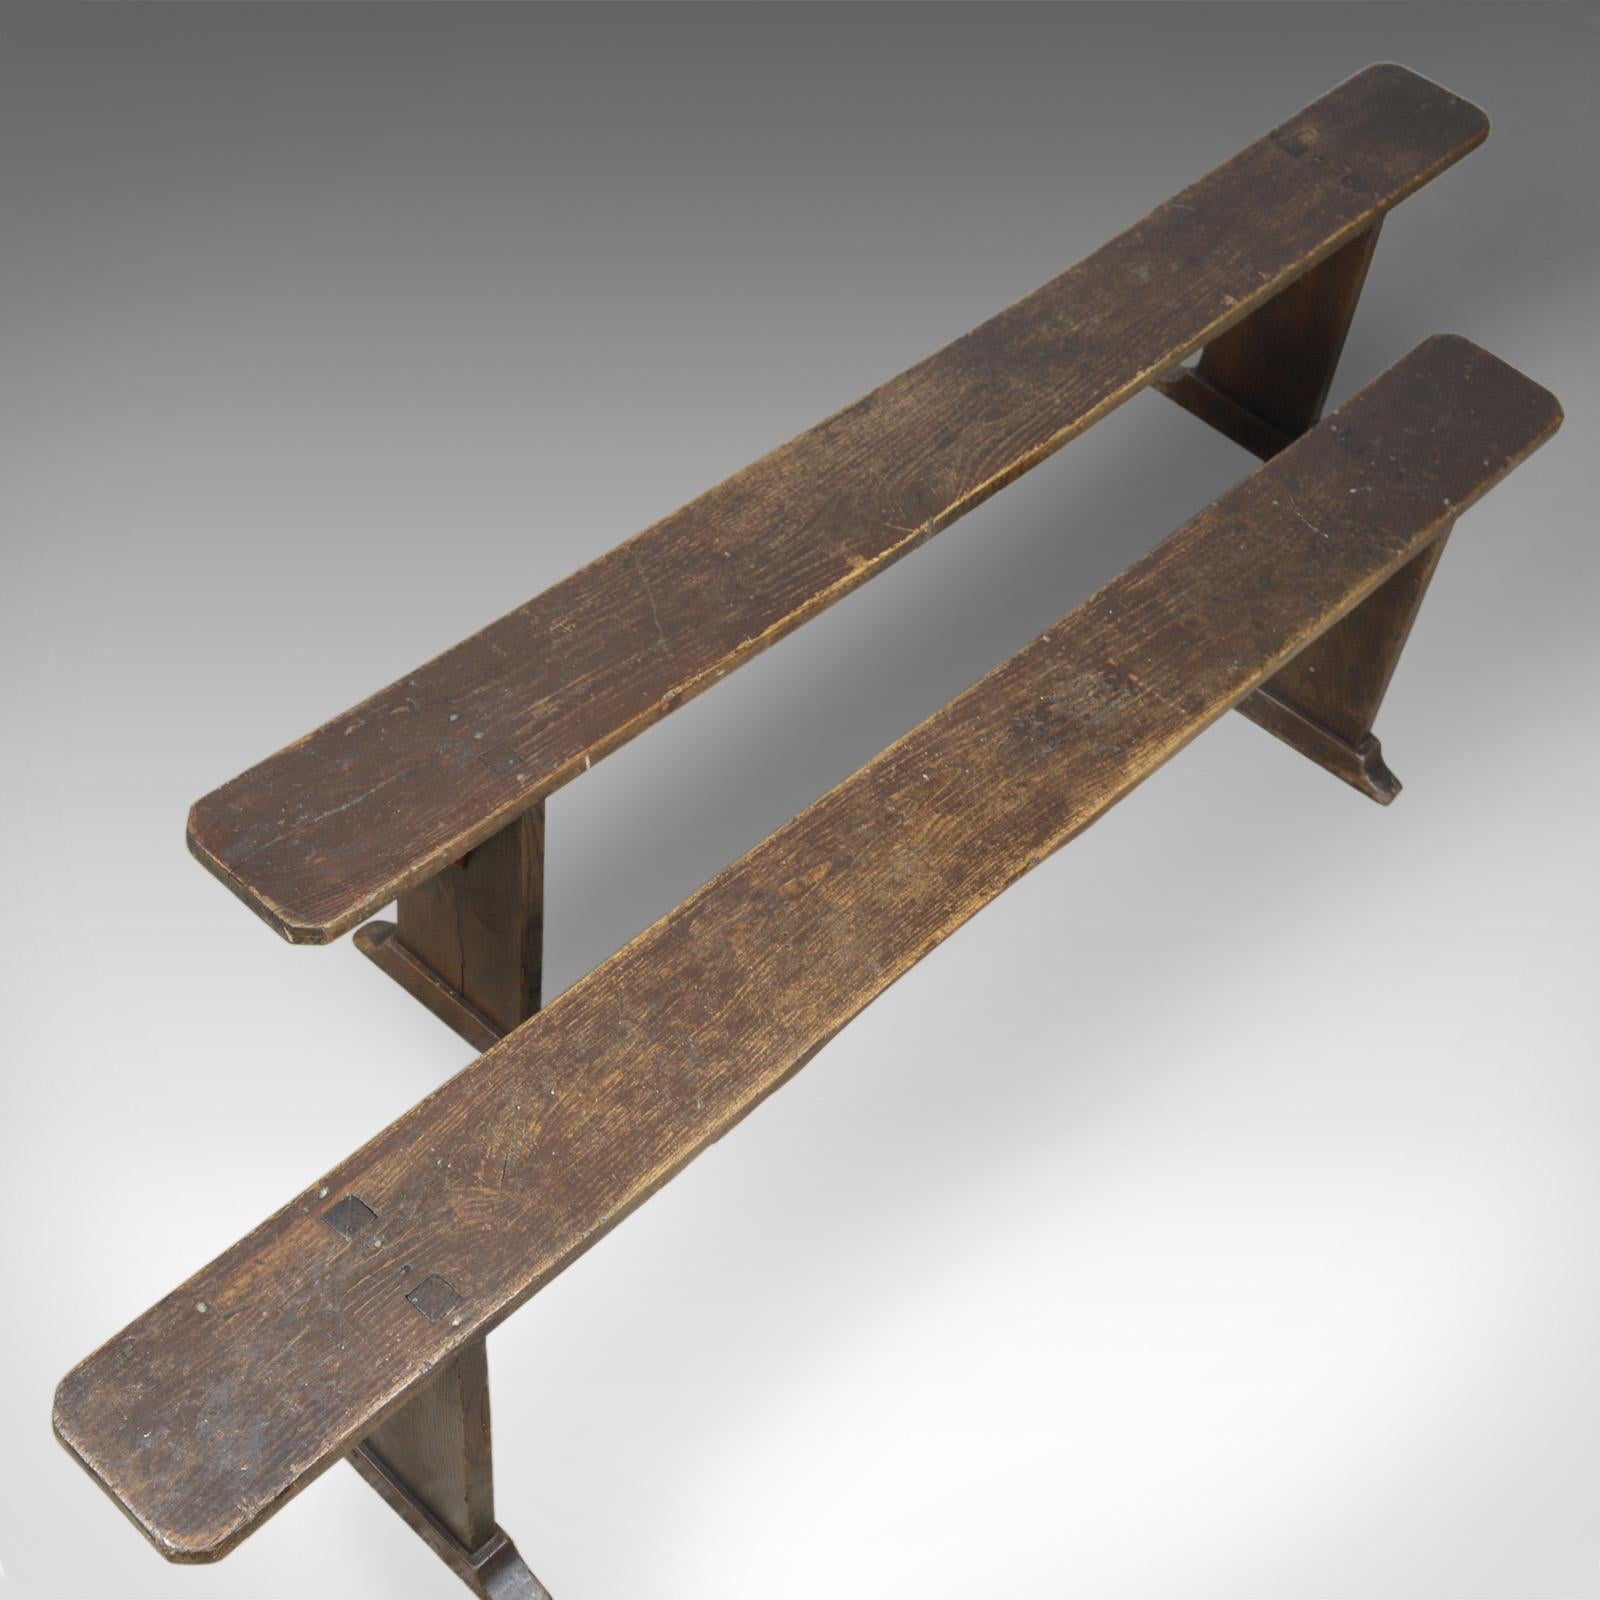 This is a pair of antique benches. Victorian, English, Provincial forms in oak, ideal for country kitchen dining and dating to the turn of the 20th century, circa 1900.

Full of country charm and character
Solid oak displaying grain interest